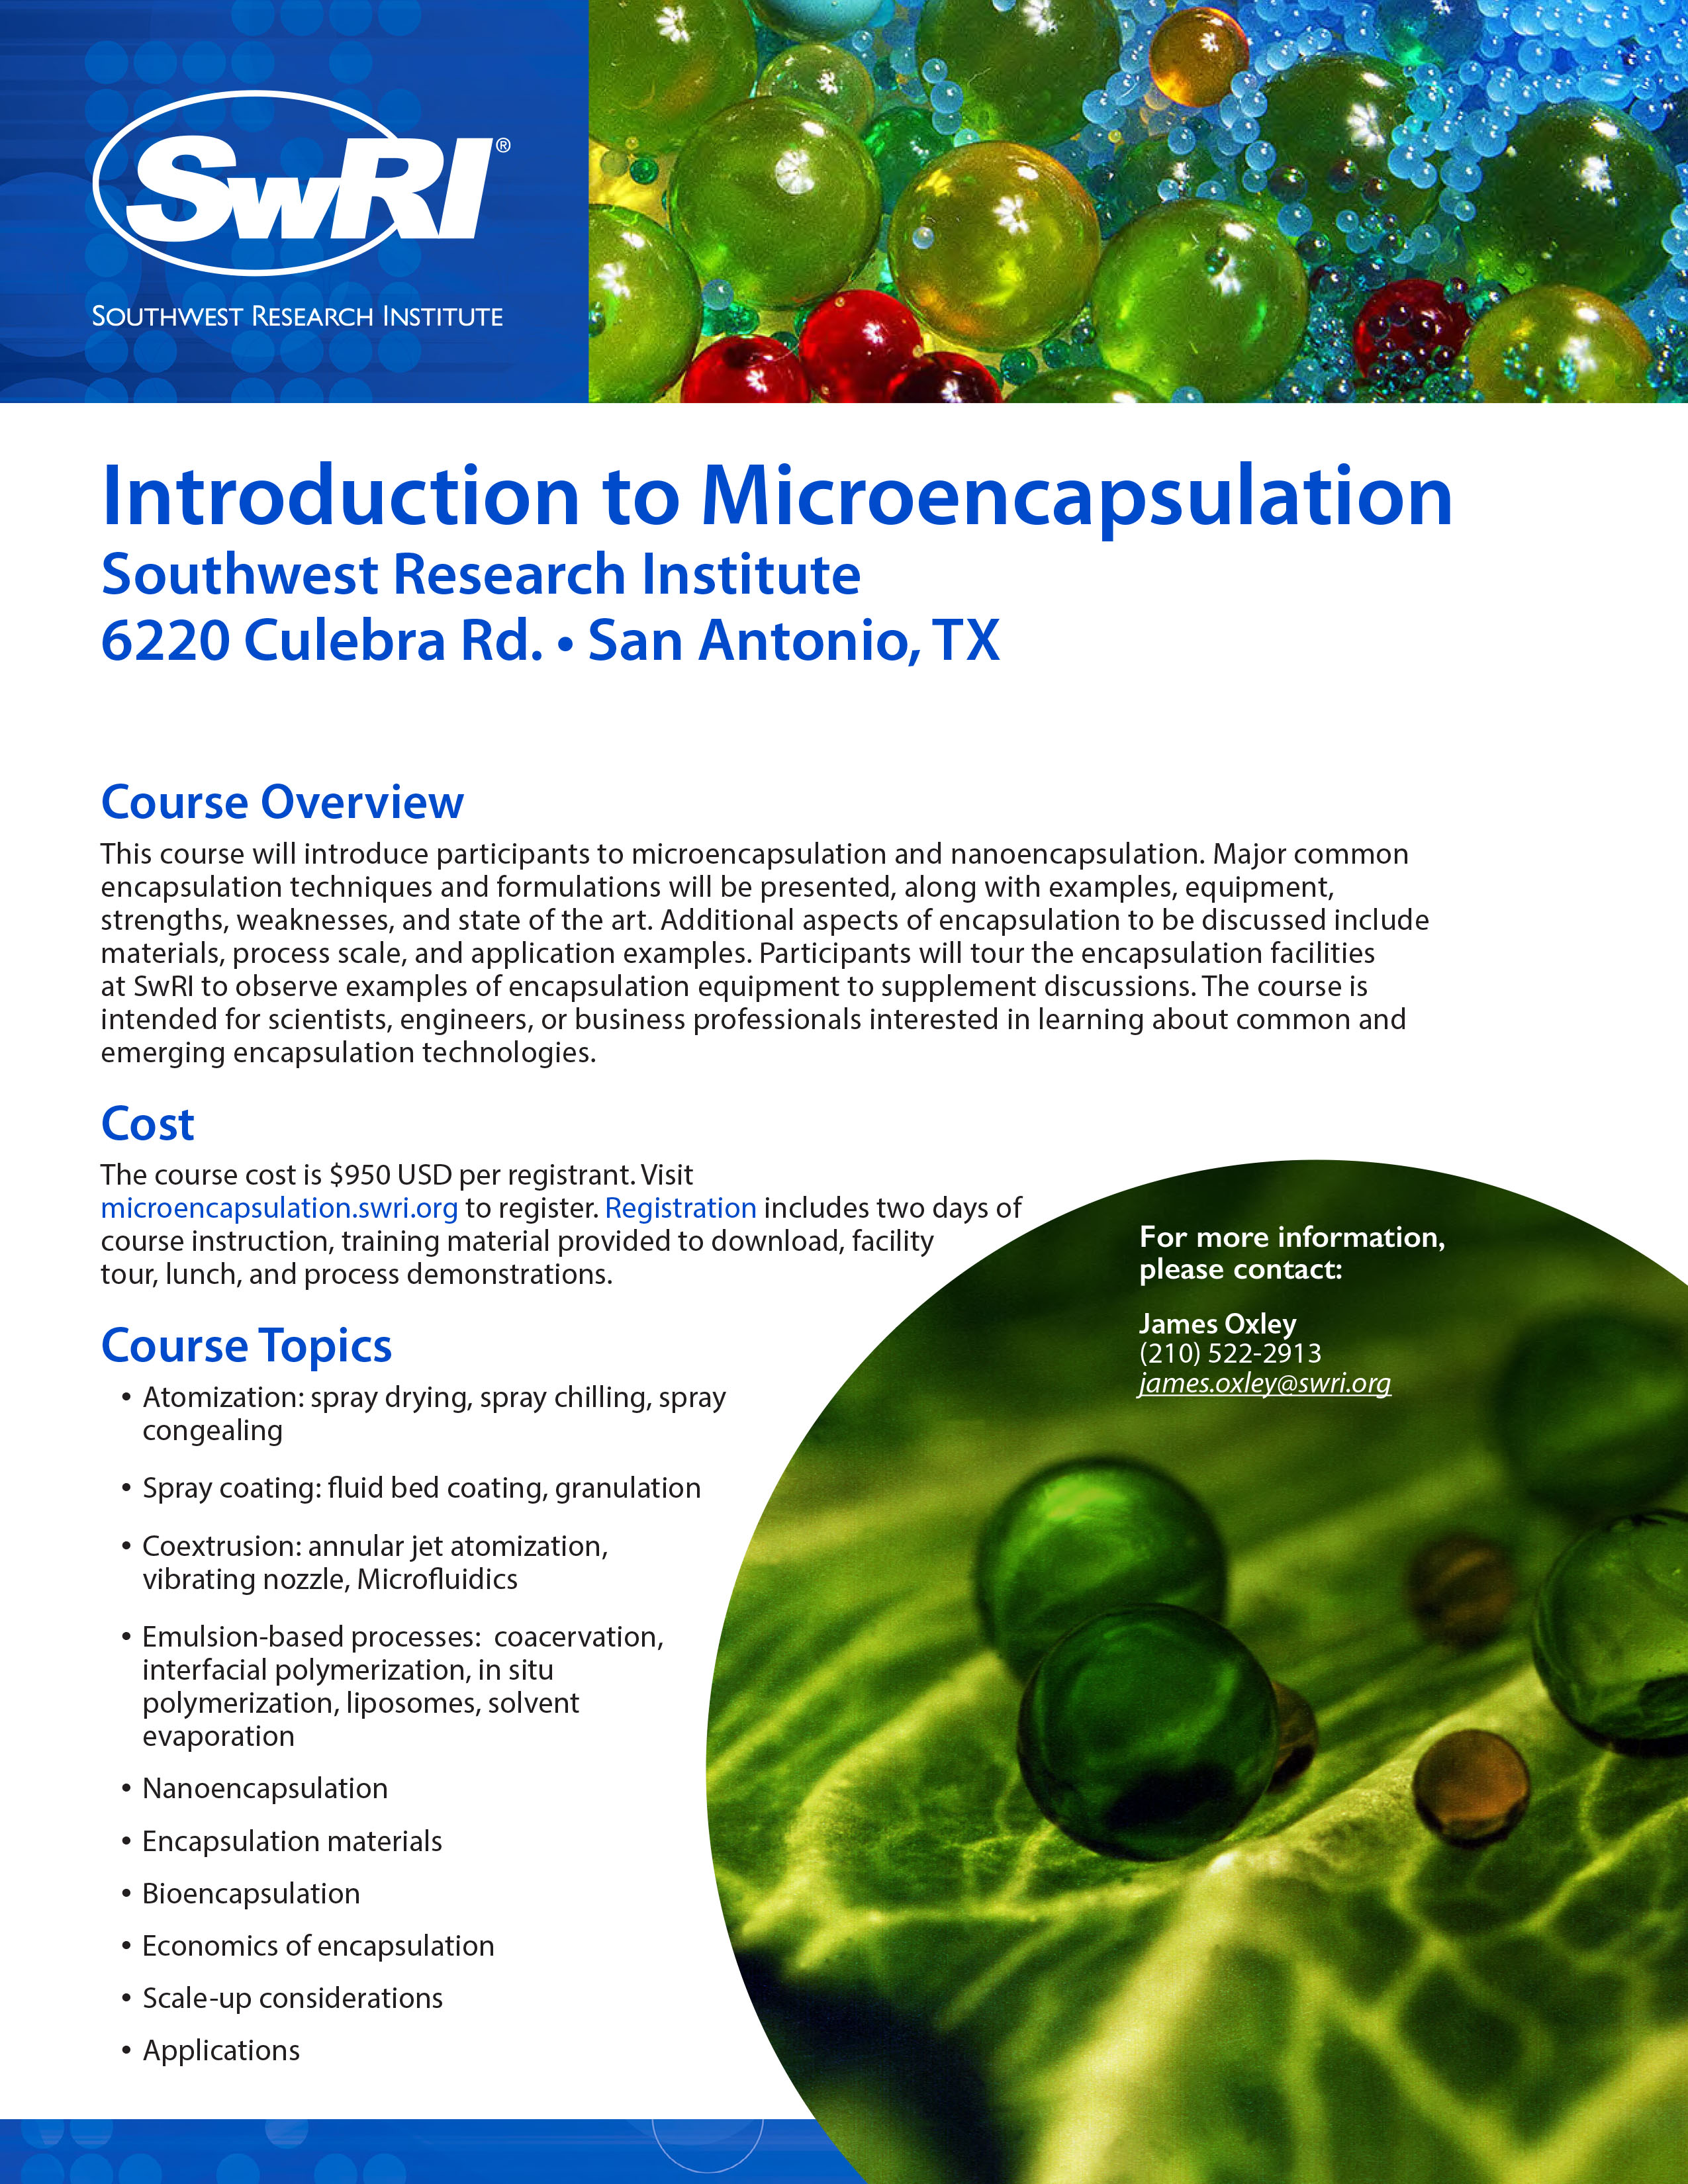 Go to Introduction to Microencapsulation flyer